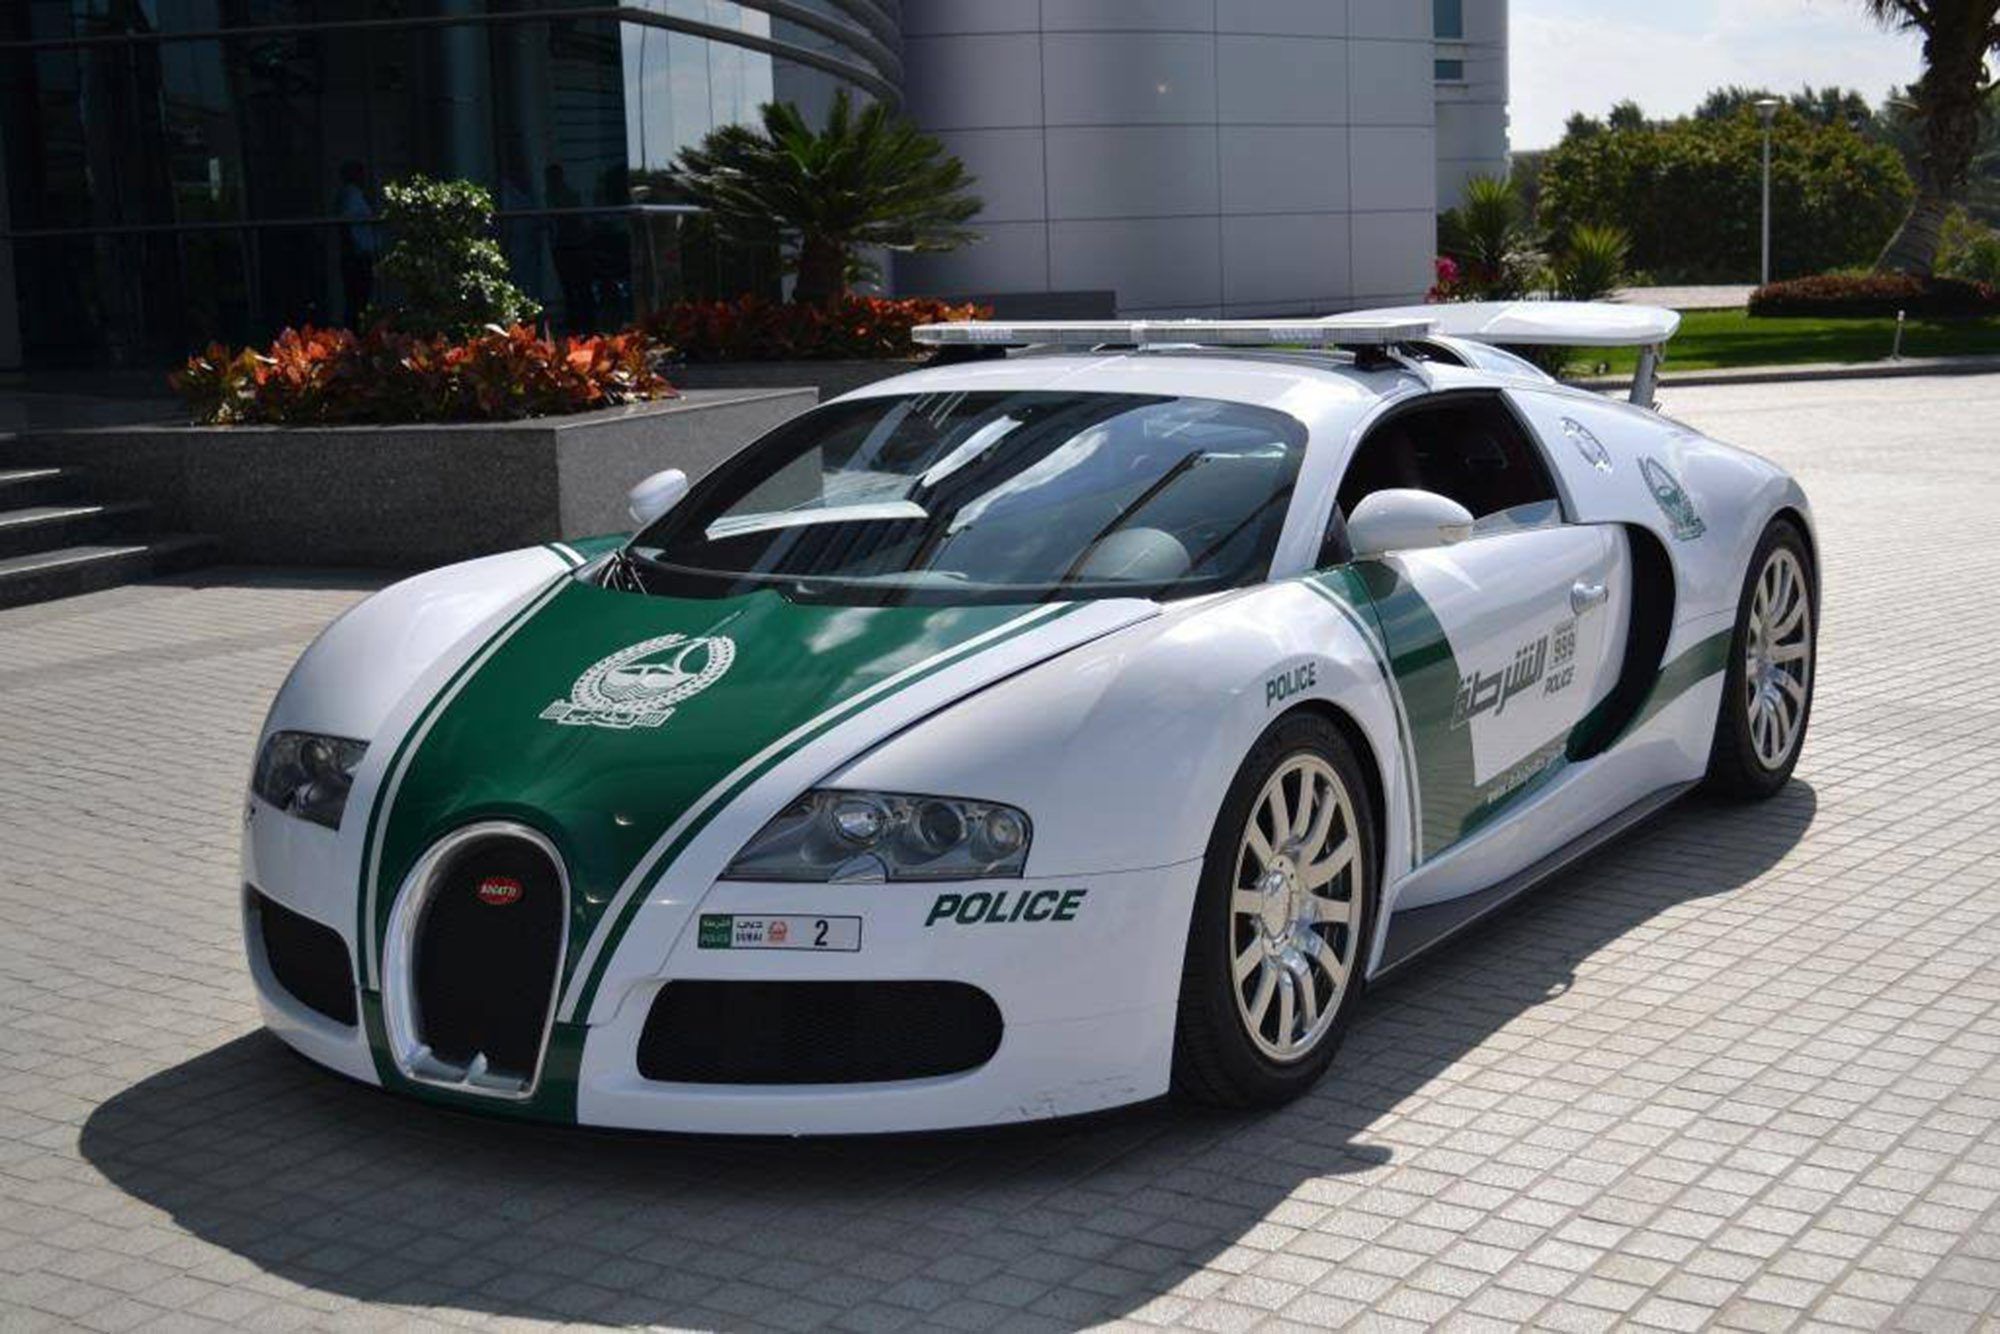 The most expensive police car in the world, Bugatti Veyron, showing off